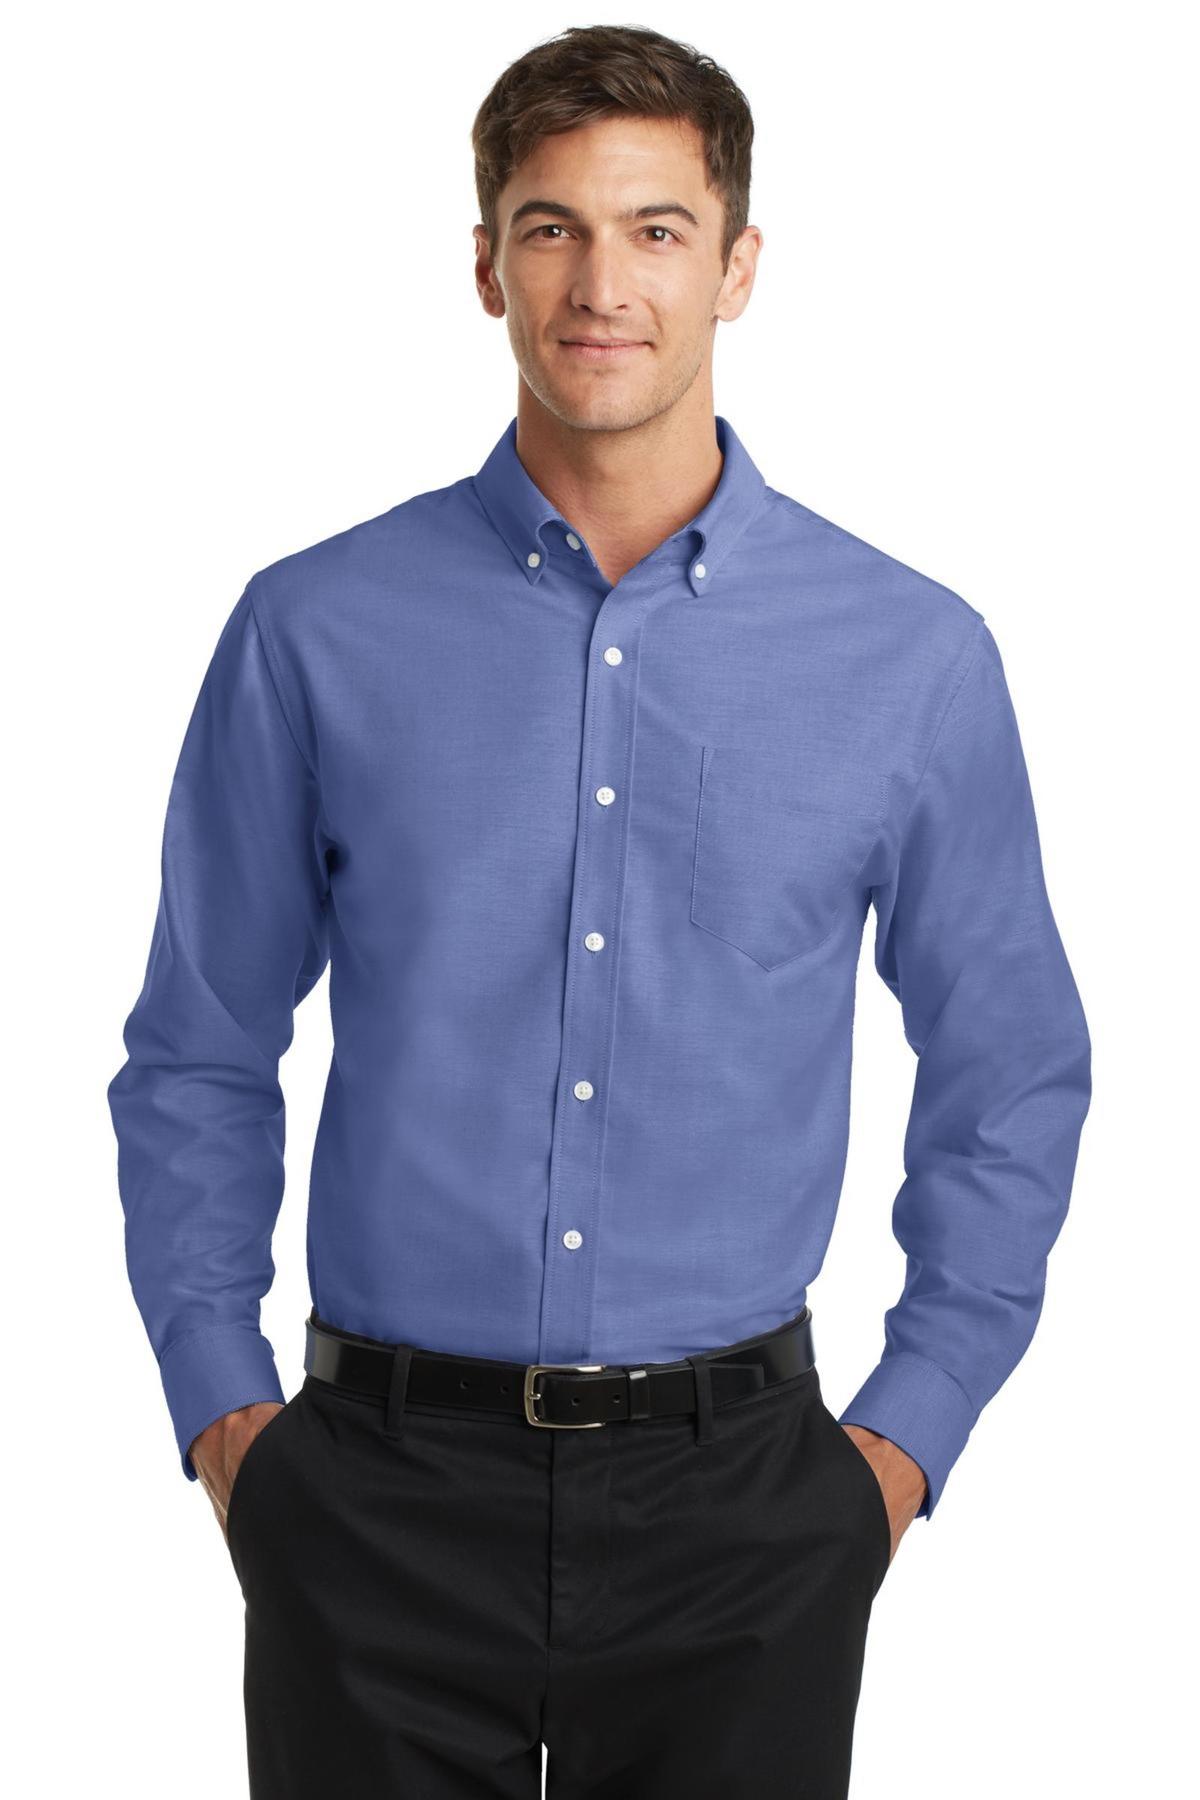 Port Authority Embroidered Men's SuperPro Oxford Shirt | All Products ...